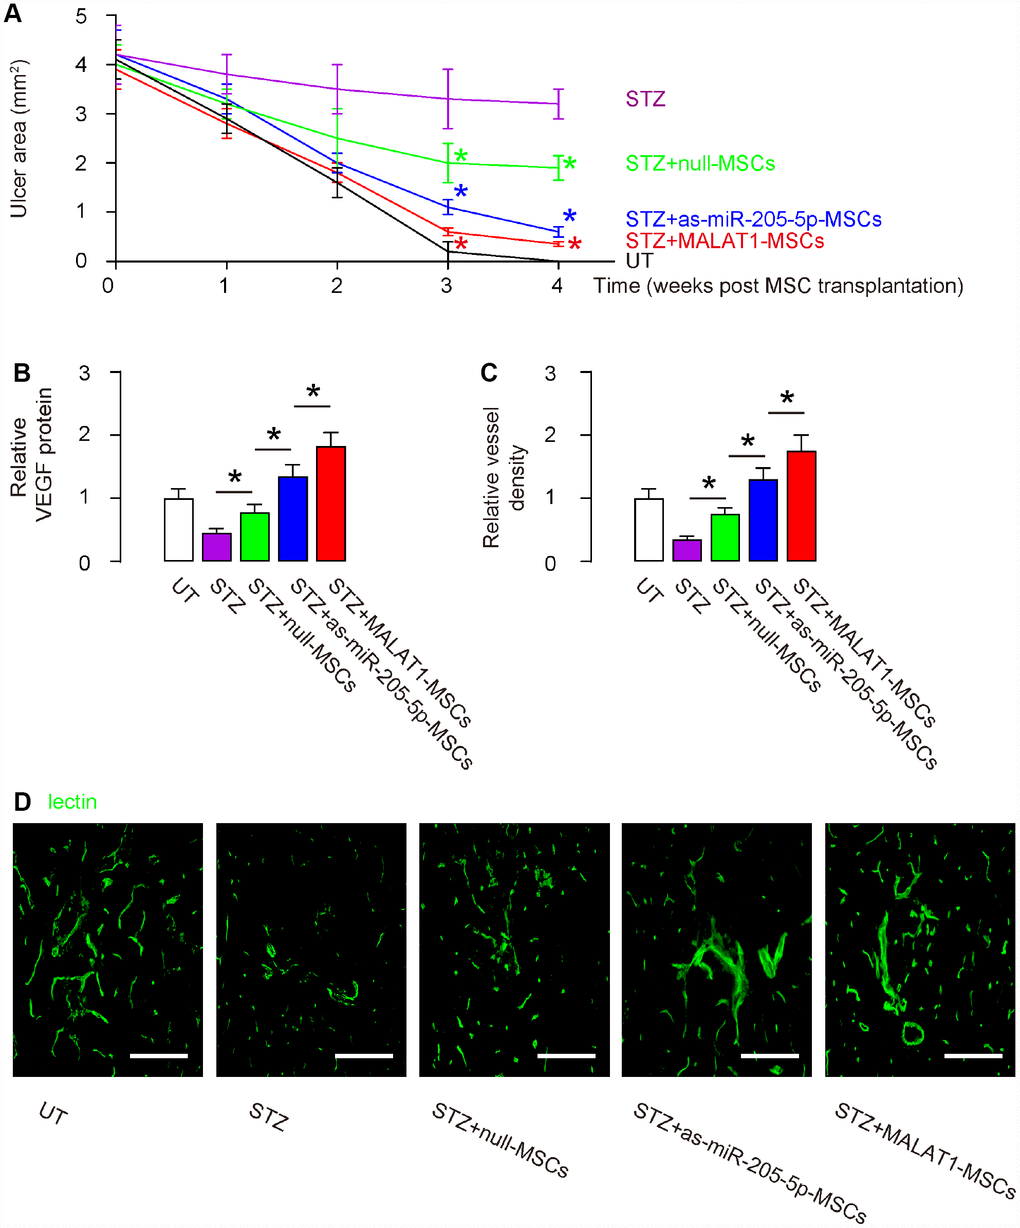 Overexpression of MALAT1 in grafted MSCs exhibits better therapeutic potential on DF than depletion of miR-205-5p in grafted MSCs. (A) Quantification of ulcer area 4 weeks after MSC transplantation. (B) ELISA for VEGF fold change in ulcer tissue. (C, D) Quantification of vessel density 4 weeks after MSC transplantation, shown by quantification of fold change (C), and by representative images (D). *p